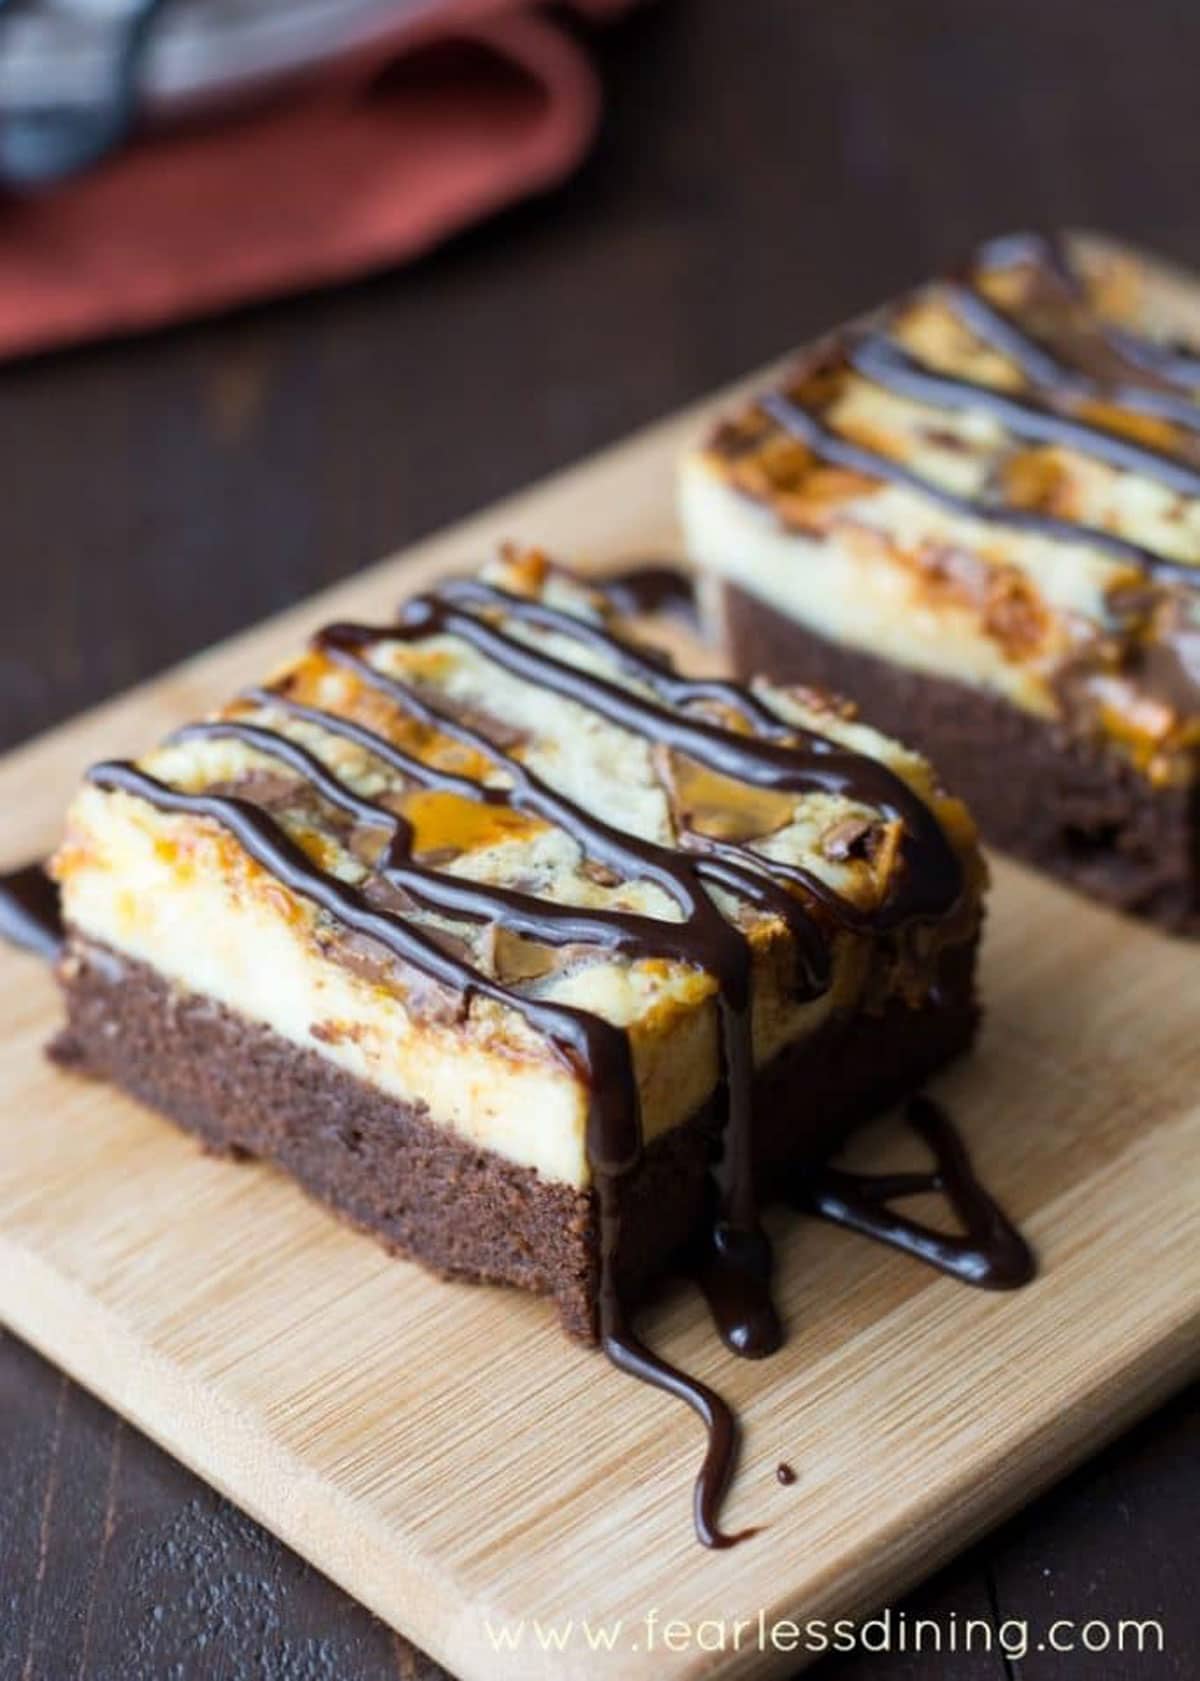 Gluten free cheesecake brownie bars on a wooden tray.